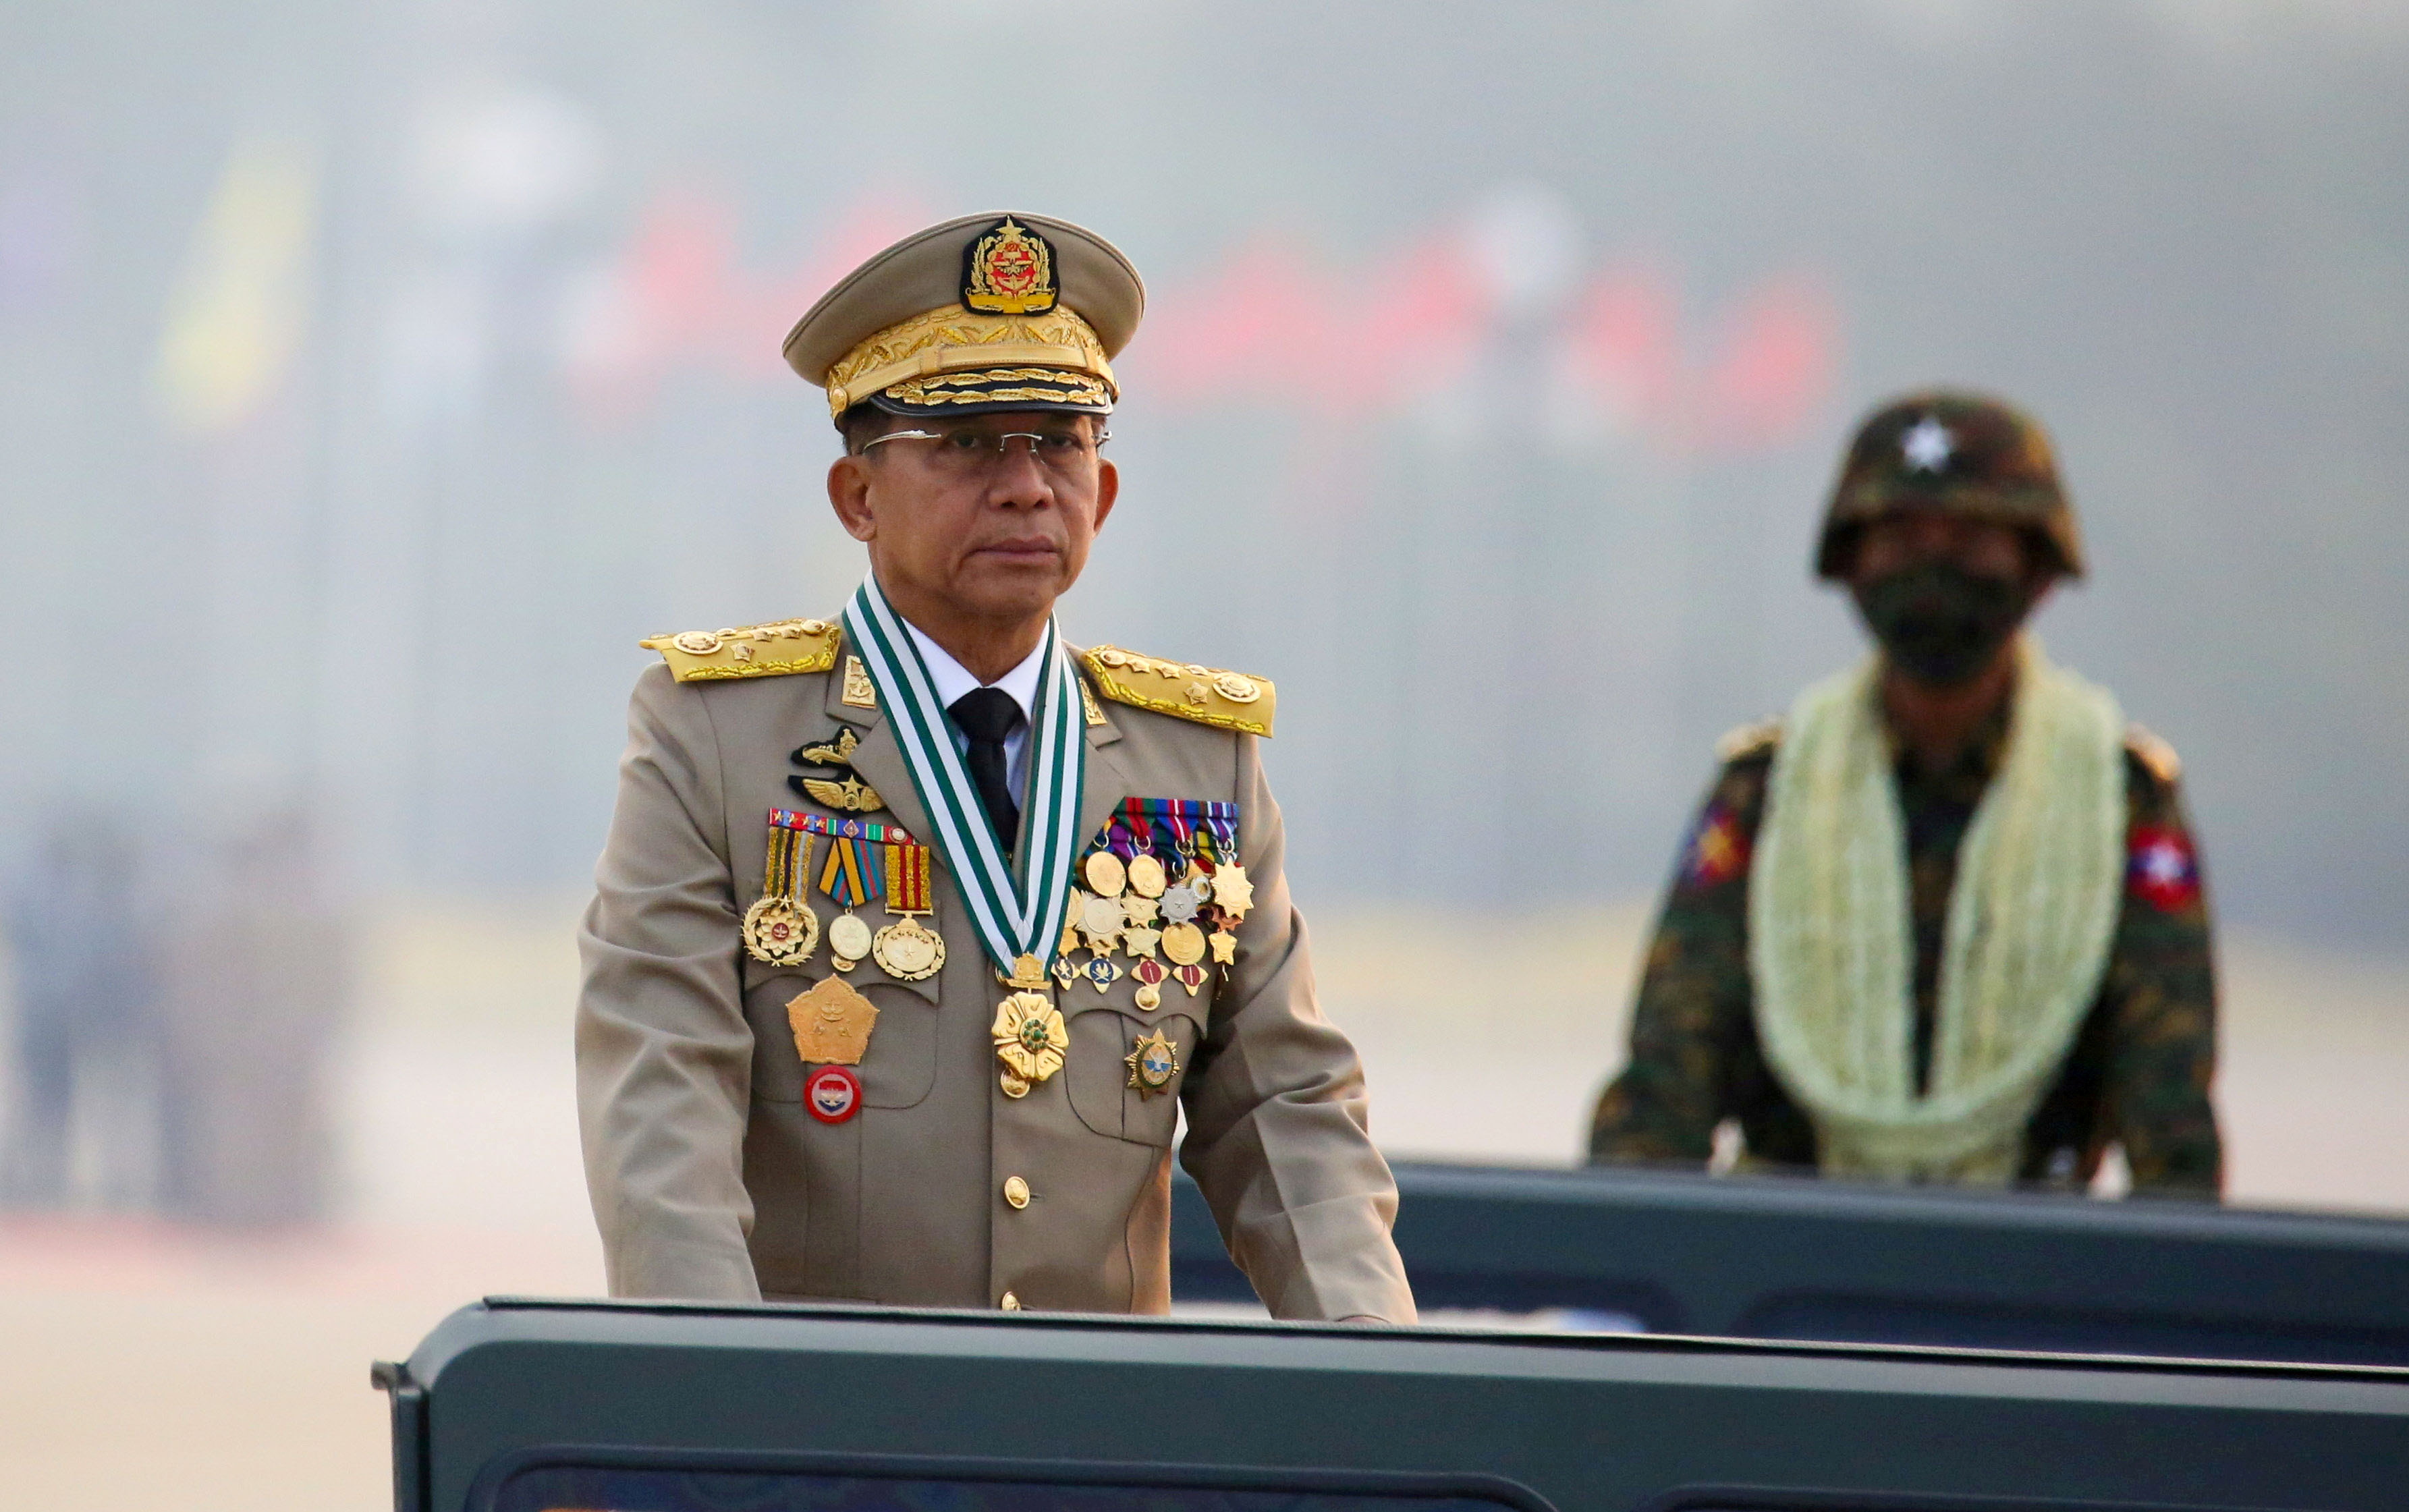 Myanmar's military ruler Min Aung Hlaing presides over an army parade on Armed Forces Day in Naypyitaw, Myanmar, March 27, 2021. REUTERS/Stringer 